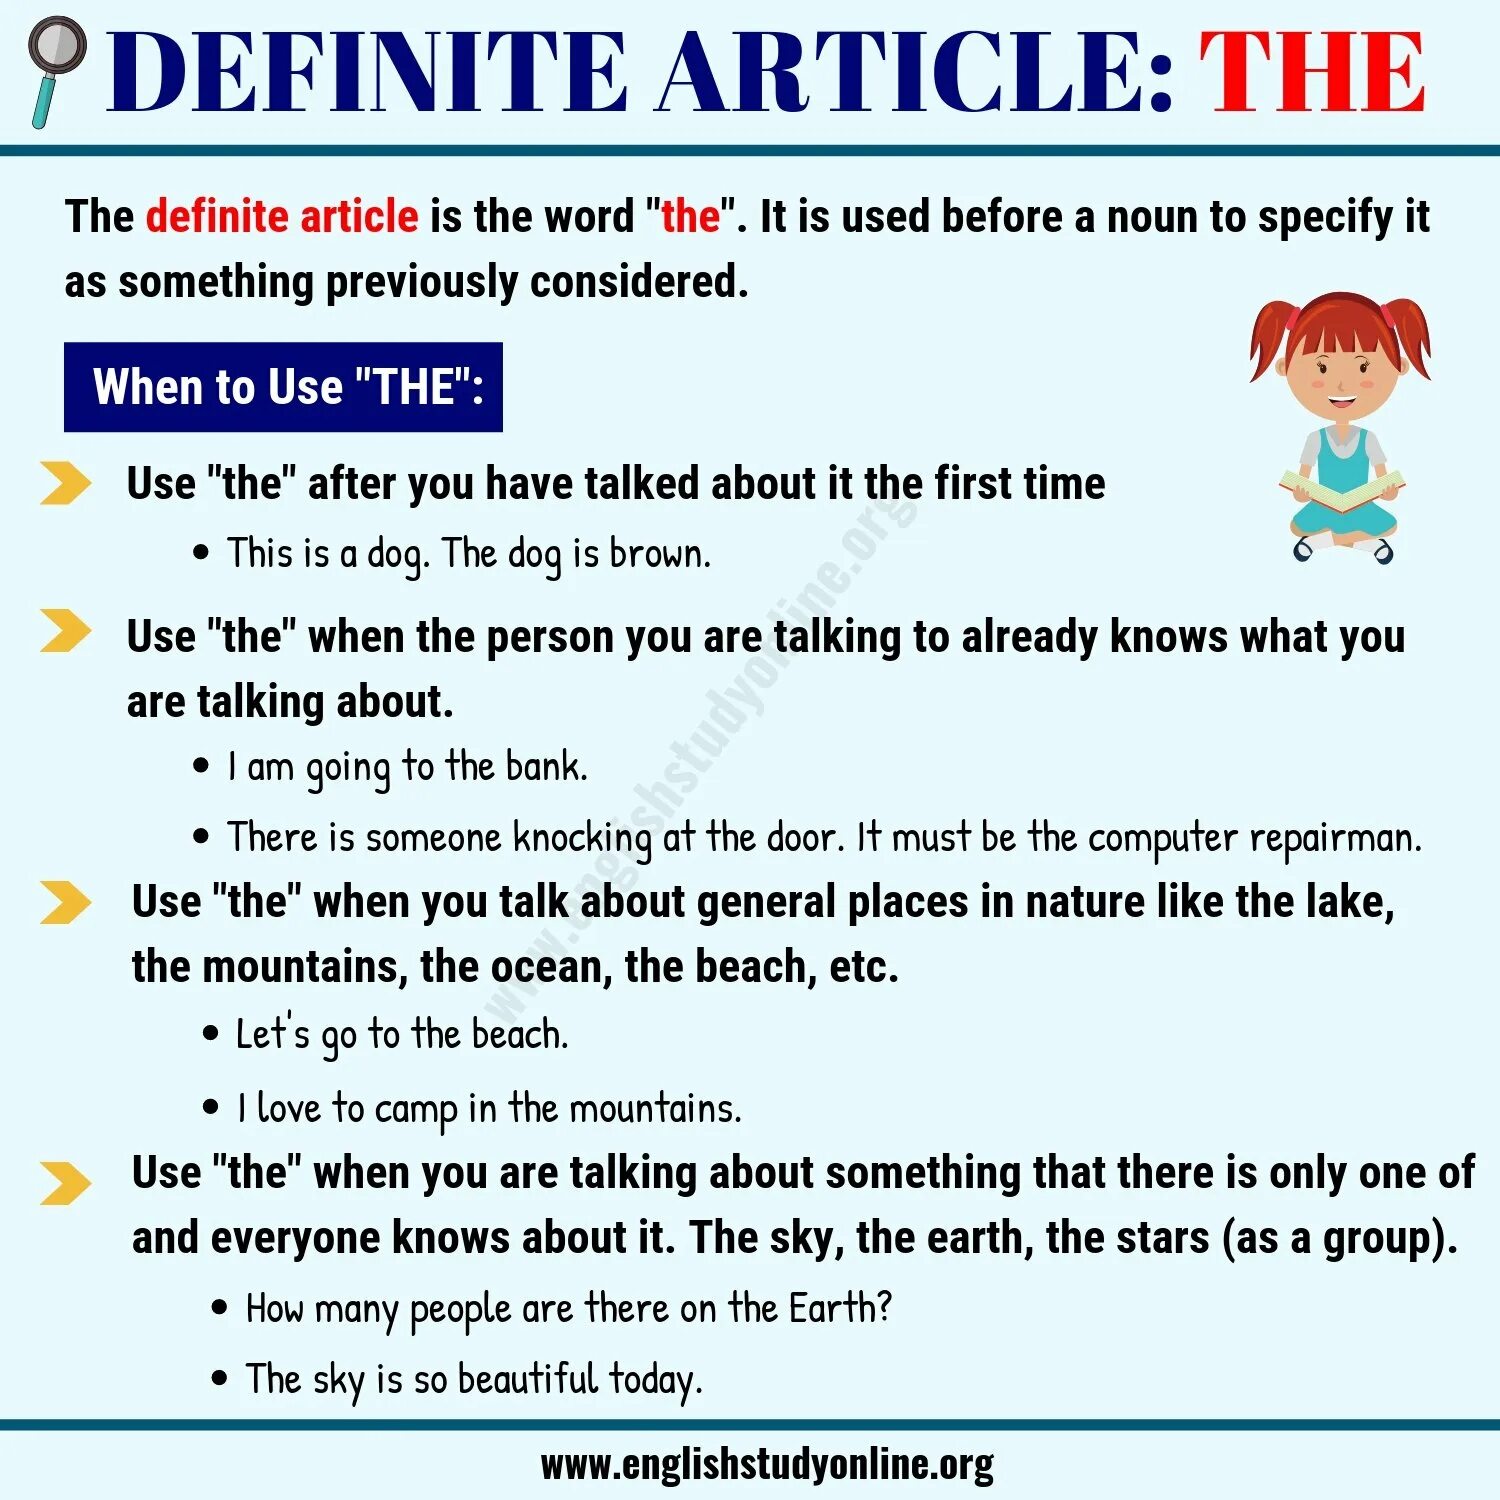 Articles. Articles in English Grammar правила. Articles English правила. The definite article правило. The indefinite article a/an правило.